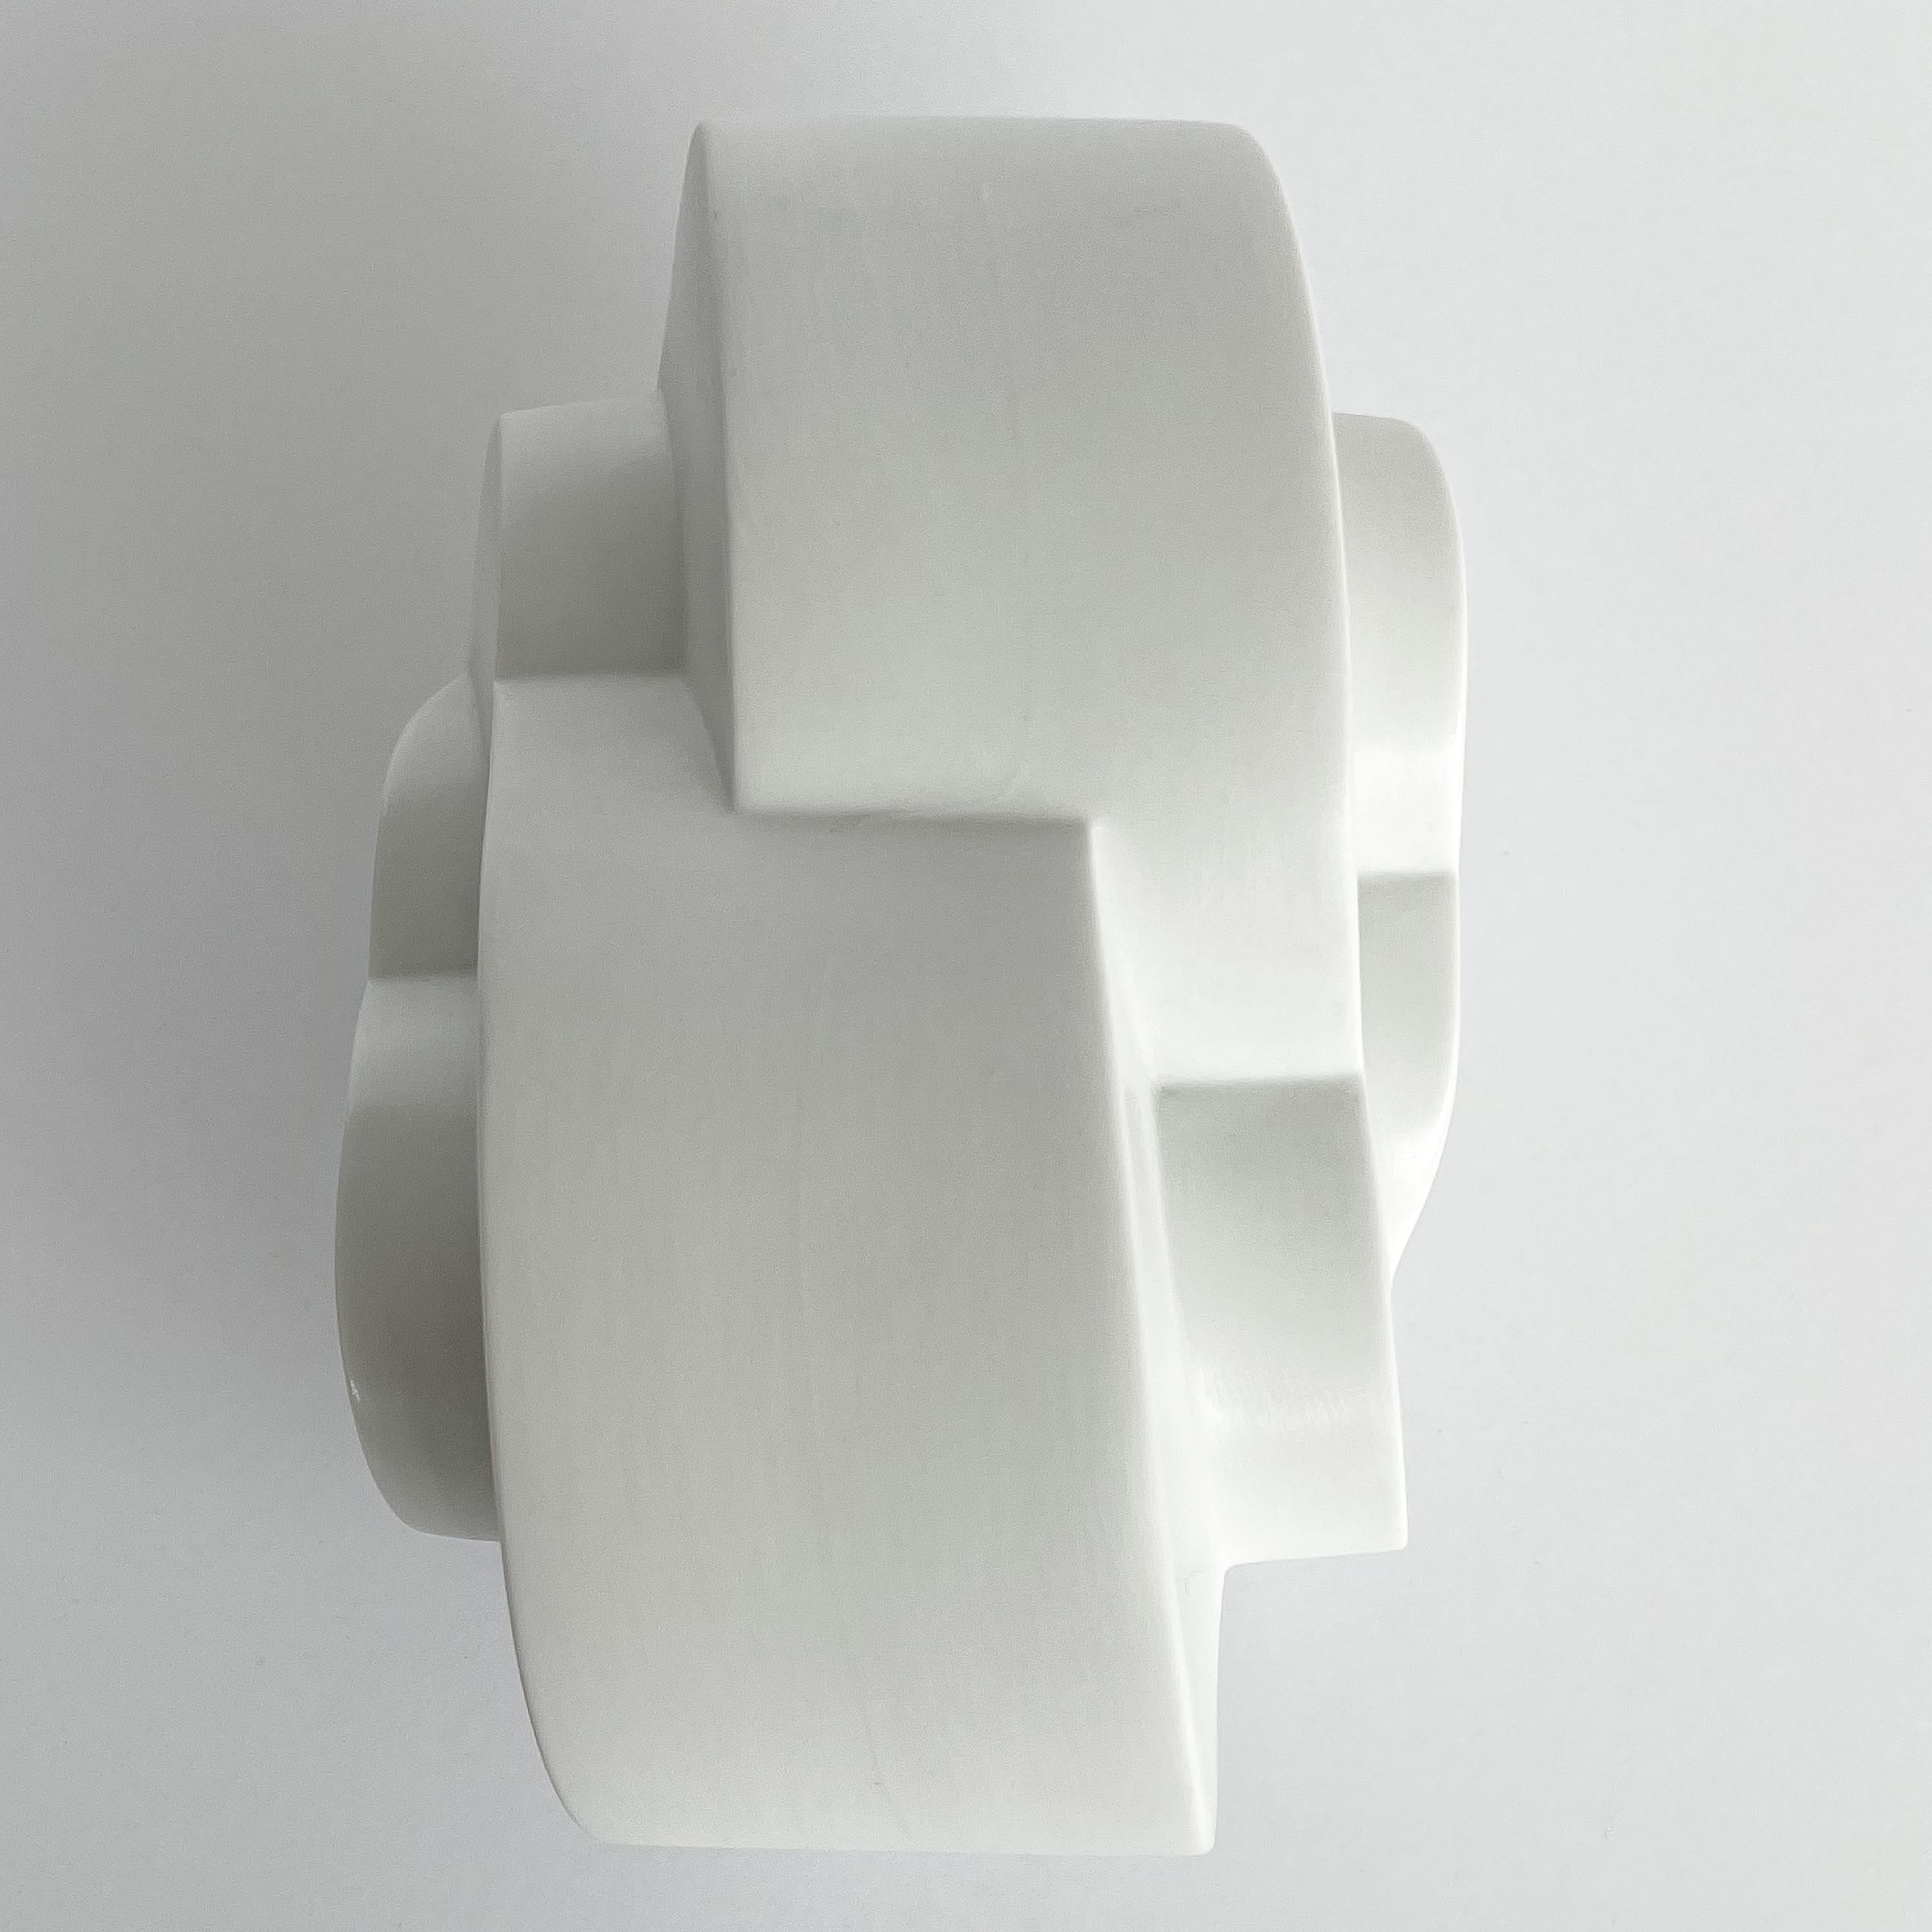 Natale Sapone Abstract Porcelain Sculpture for Rosenthal 4